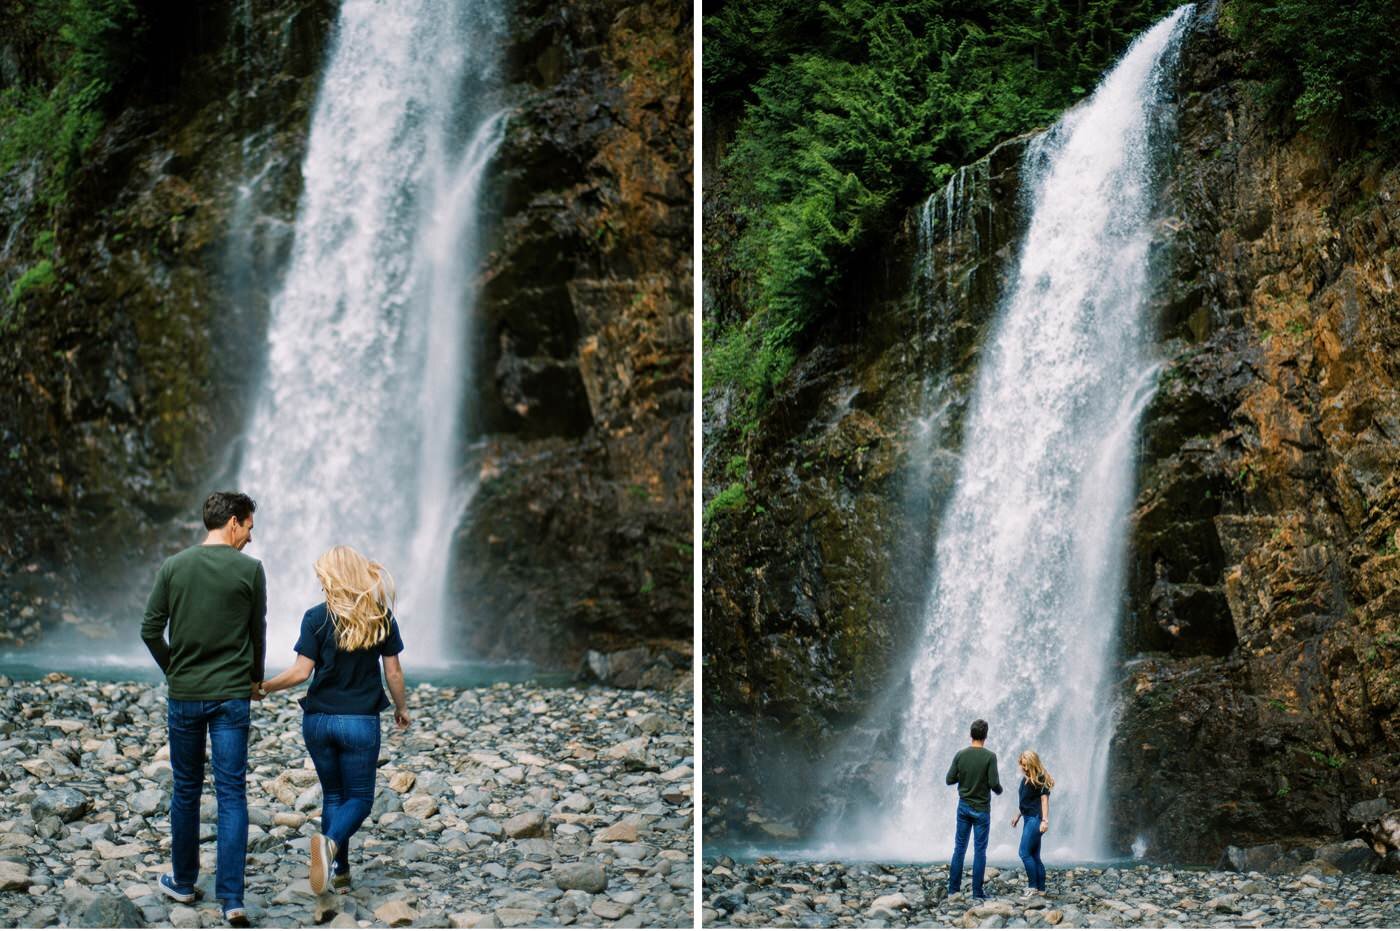 029_franklin falls and snoqualmie pass engagement session locations by ryan flynn.jpg